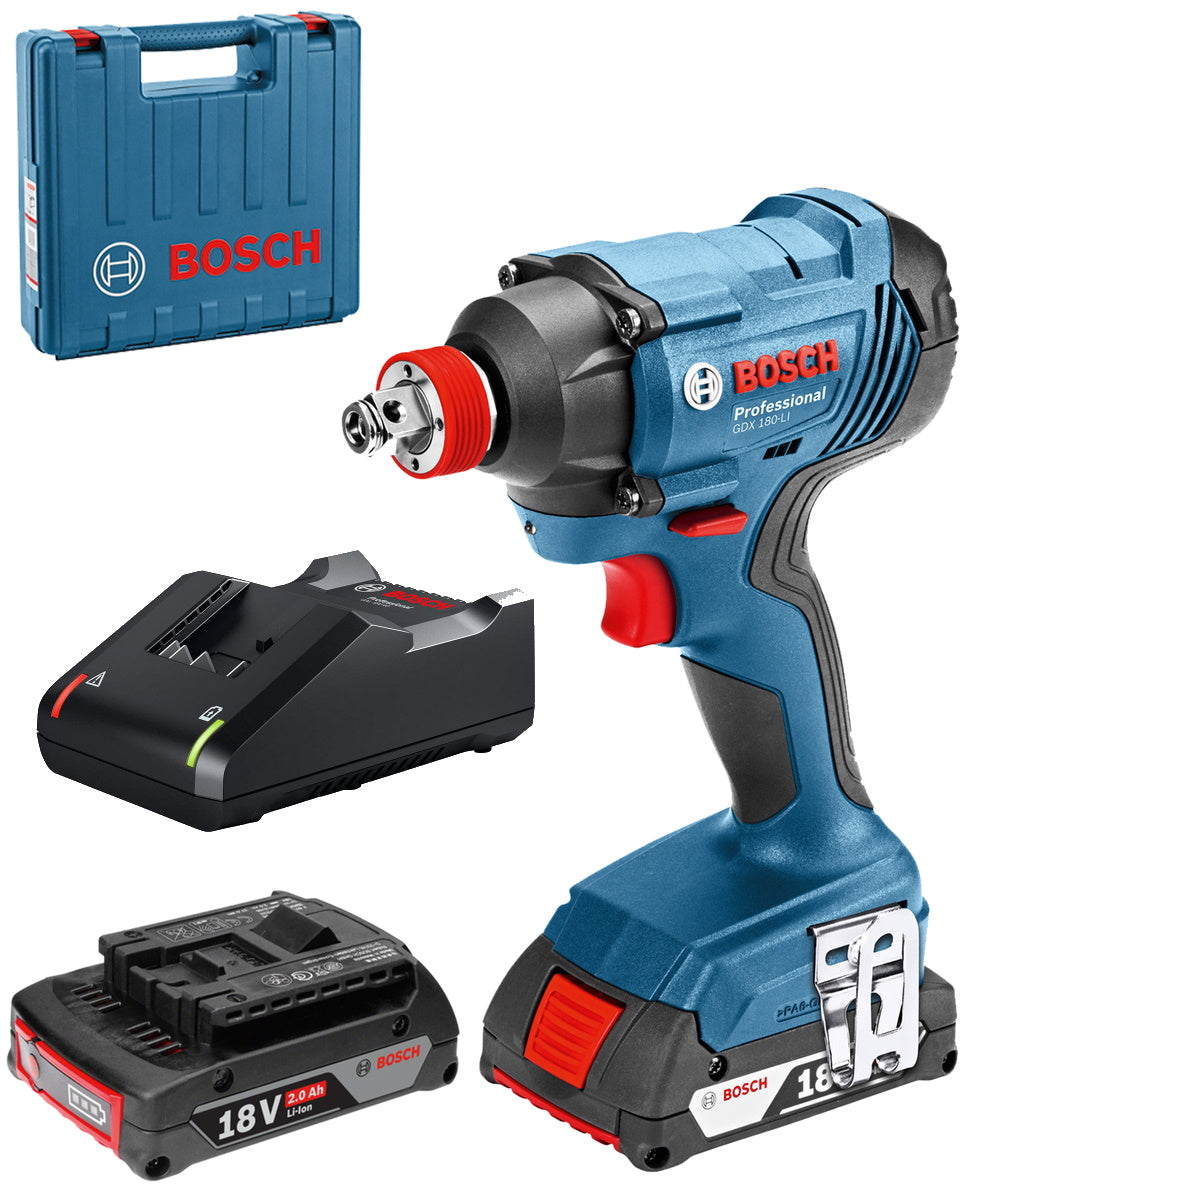 Bosch Professional Cordless Impact Driver/Wrench GDX 180-LI 06019G5223 Power Tool Services